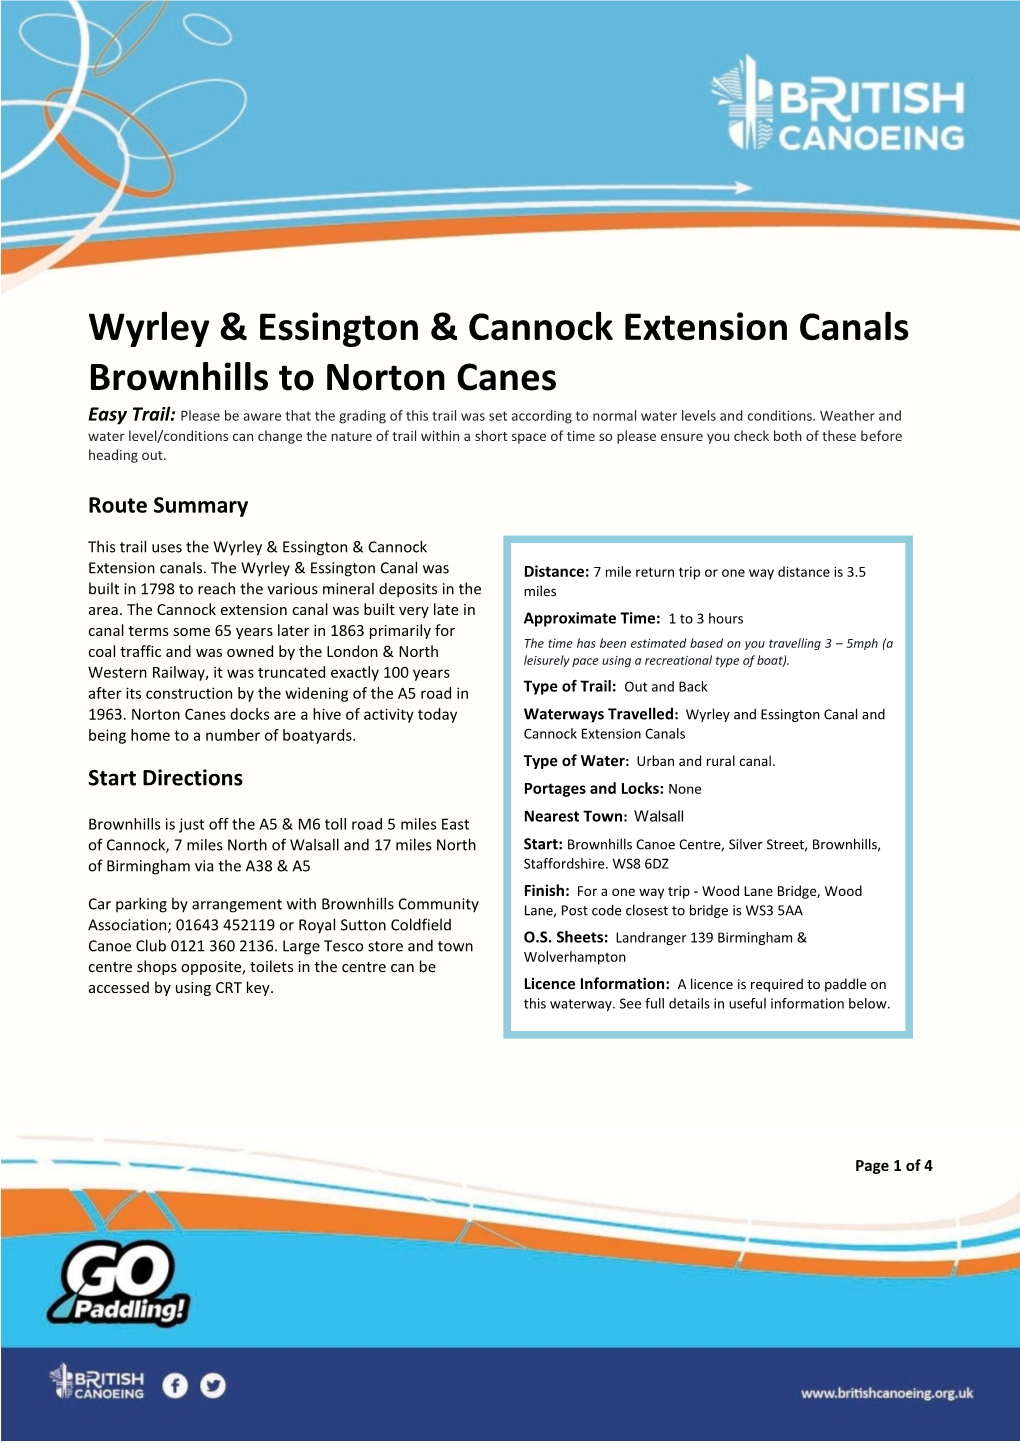 Wyrley & Essington & Cannock Extension Canals Brownhills To